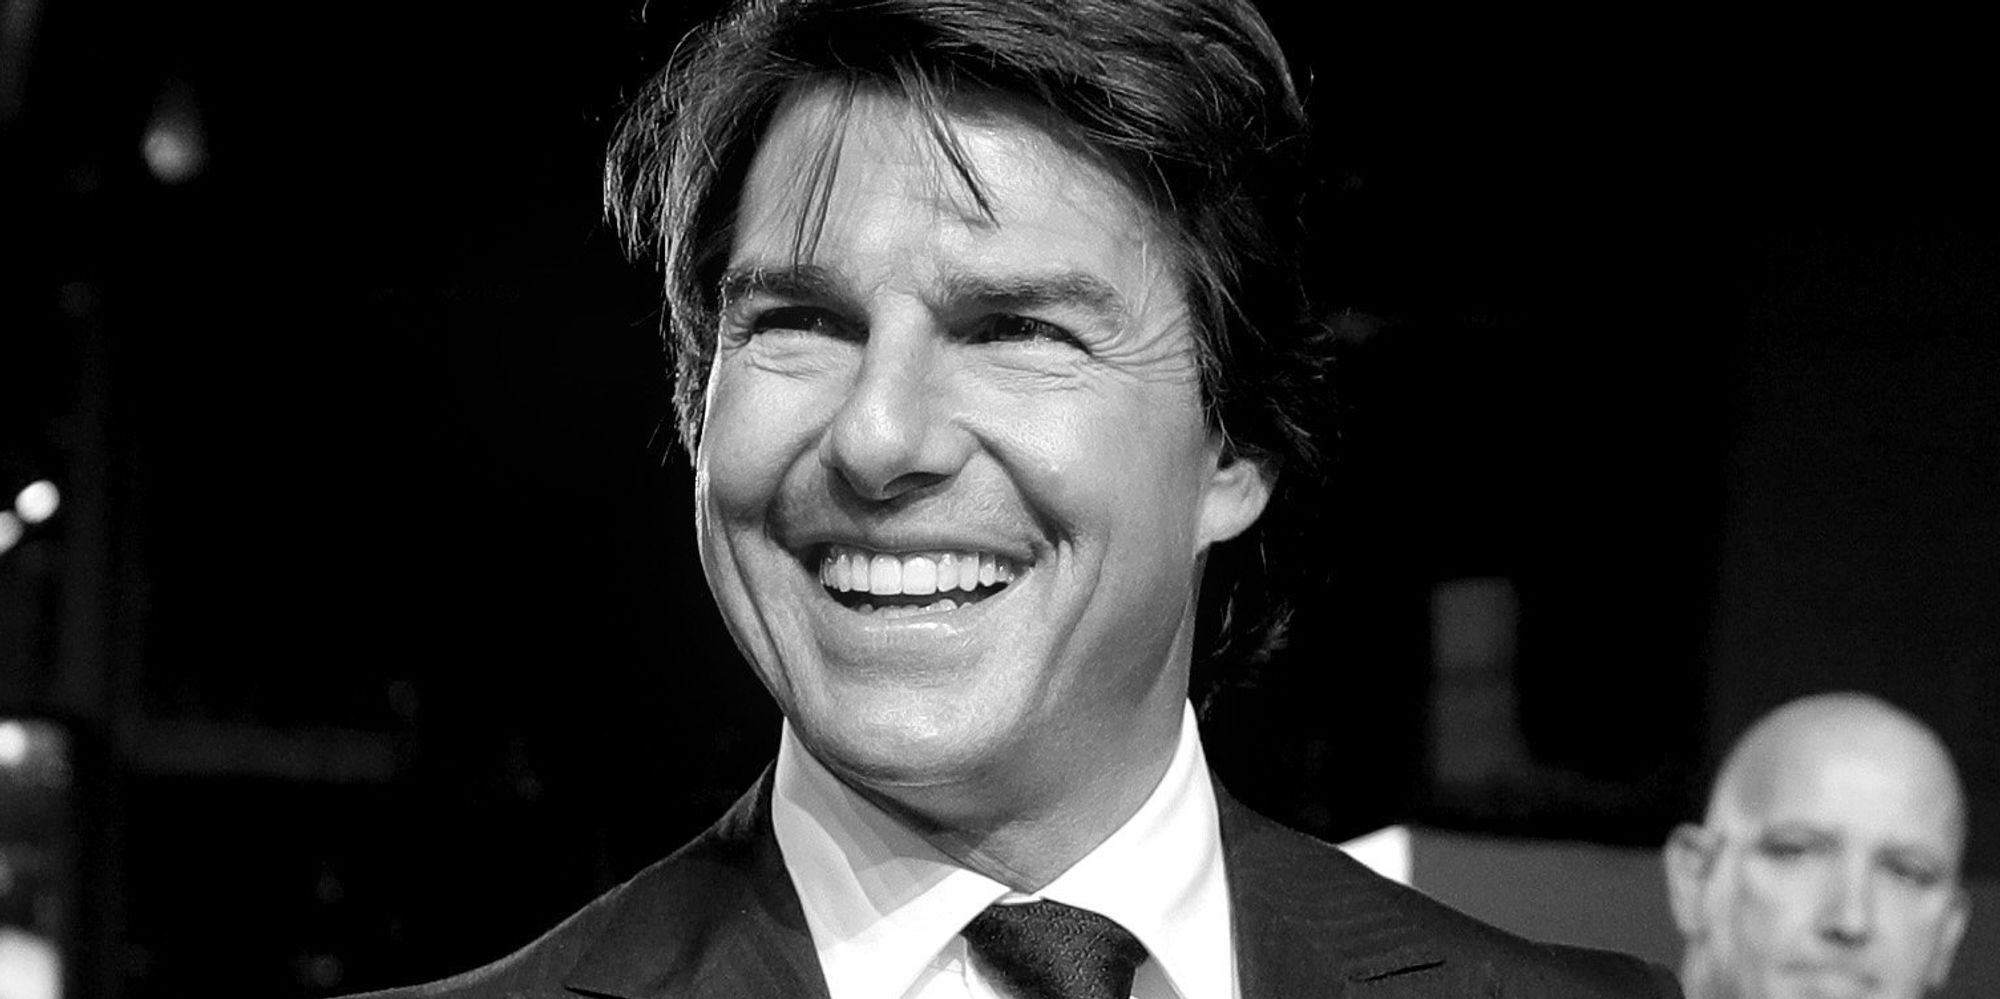 Tom Cruise Explains The 'Intense' Preparation For His Stunts | The ... - Huffington Post